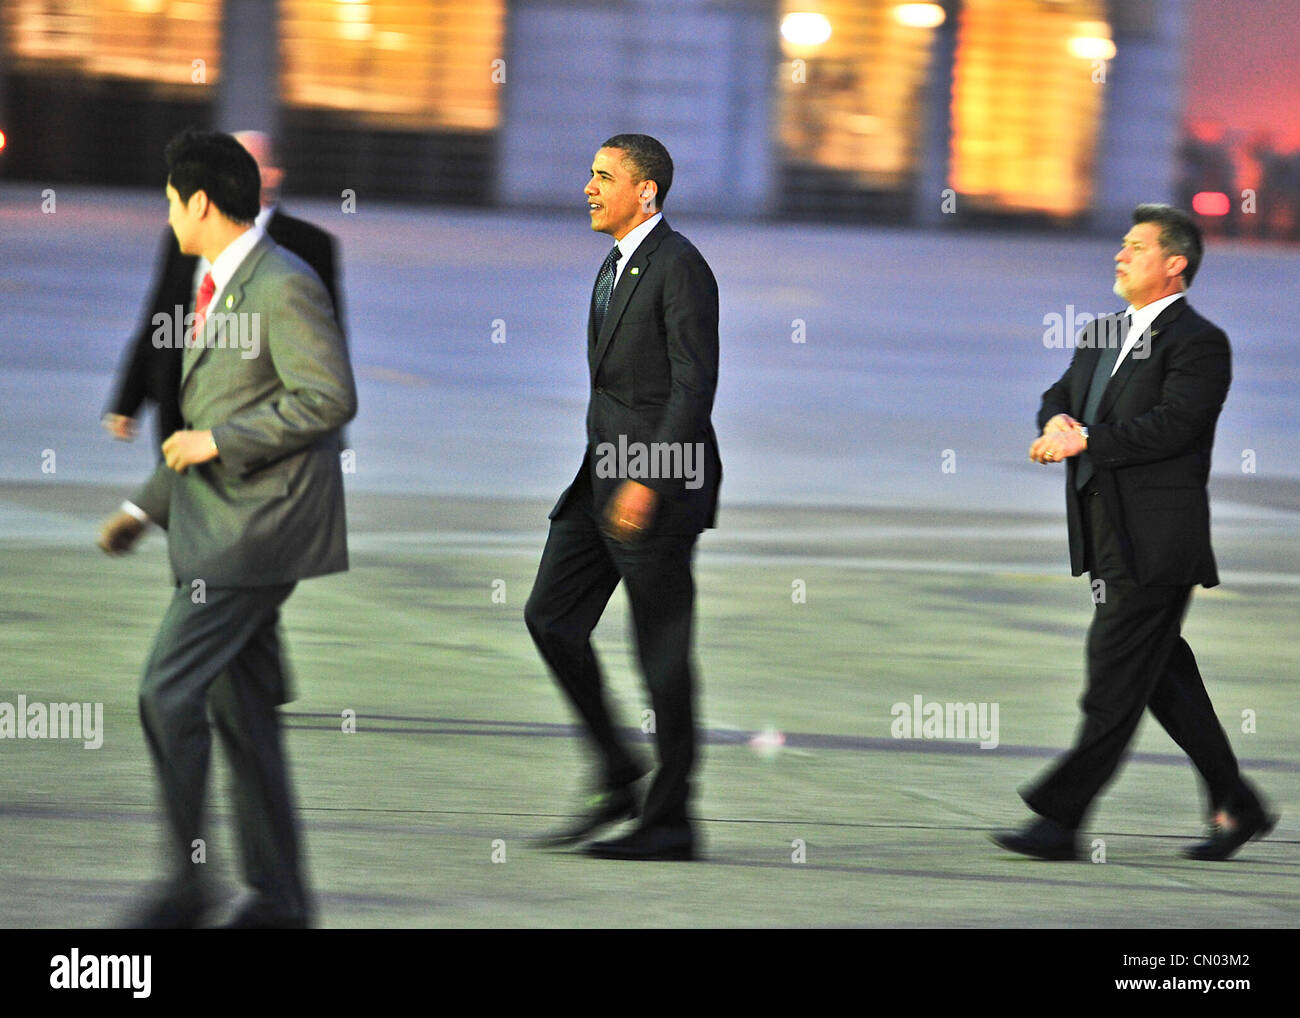 Air Force one taxis down a runway here after landing at Osan Air Base Republic of Korea, March 25, 2012. Osan was the first stop for the president during his tour of Korea. Stock Photo